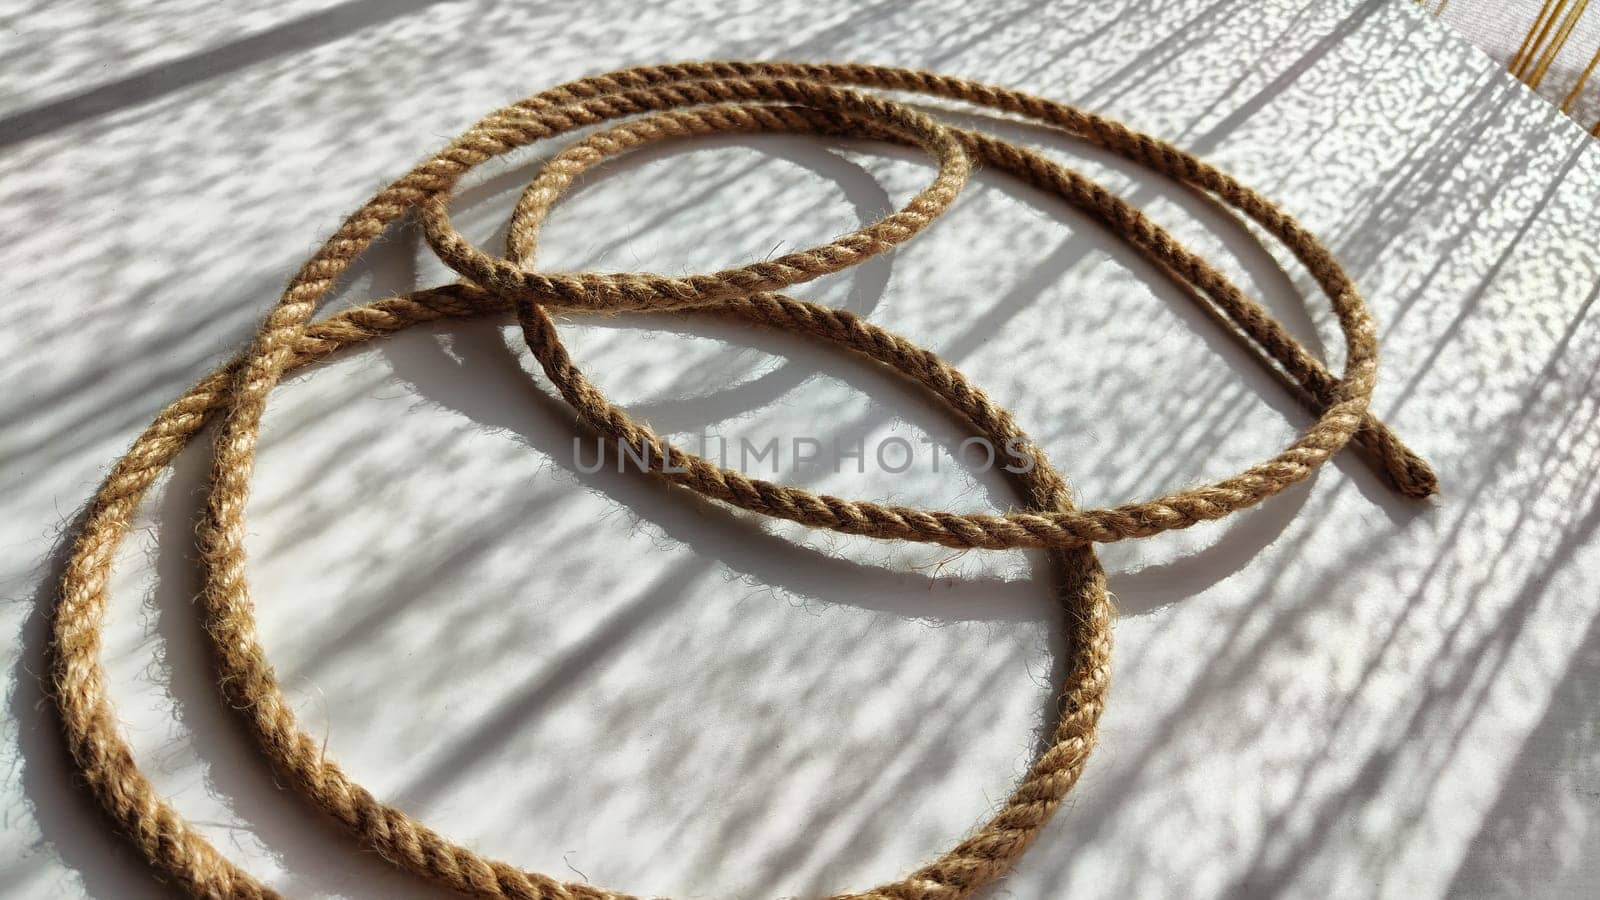 Jute twisted rope lying on a white surface with shadows from the sun. Abstract background, texture, pattern, frame